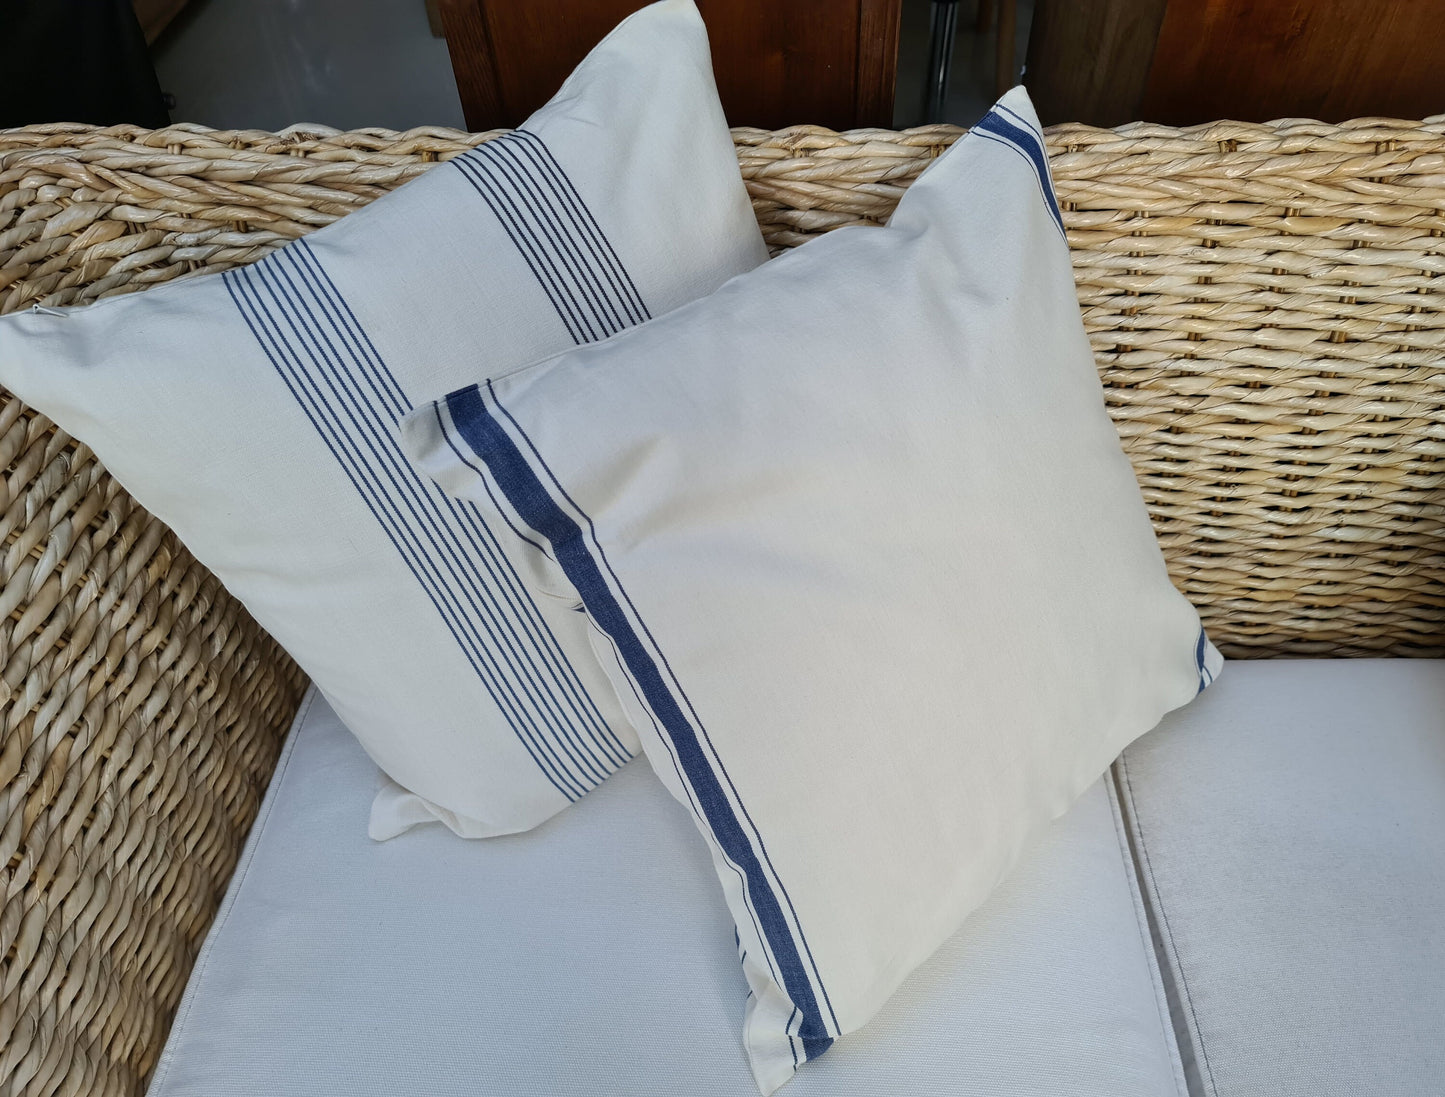 French striped cushion pillow cover 18in 45cm sq Traditional double navy nautical stripes on premium cream cotton Double sided Heavy duty